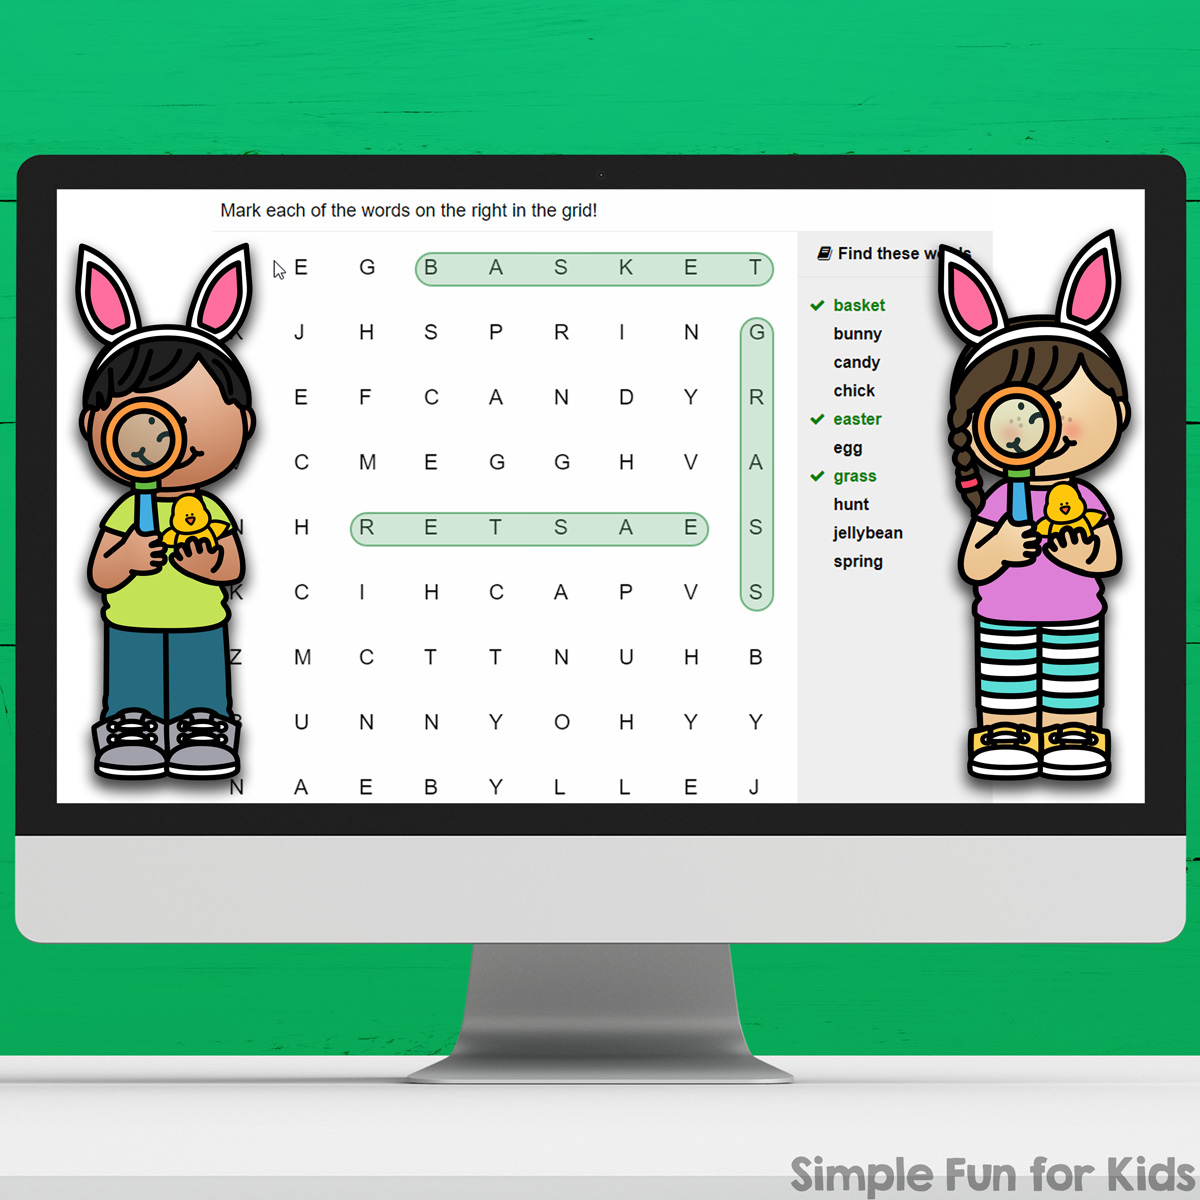 Picture of the interactive Easter word search displayed on a monitor in front of a light green background.